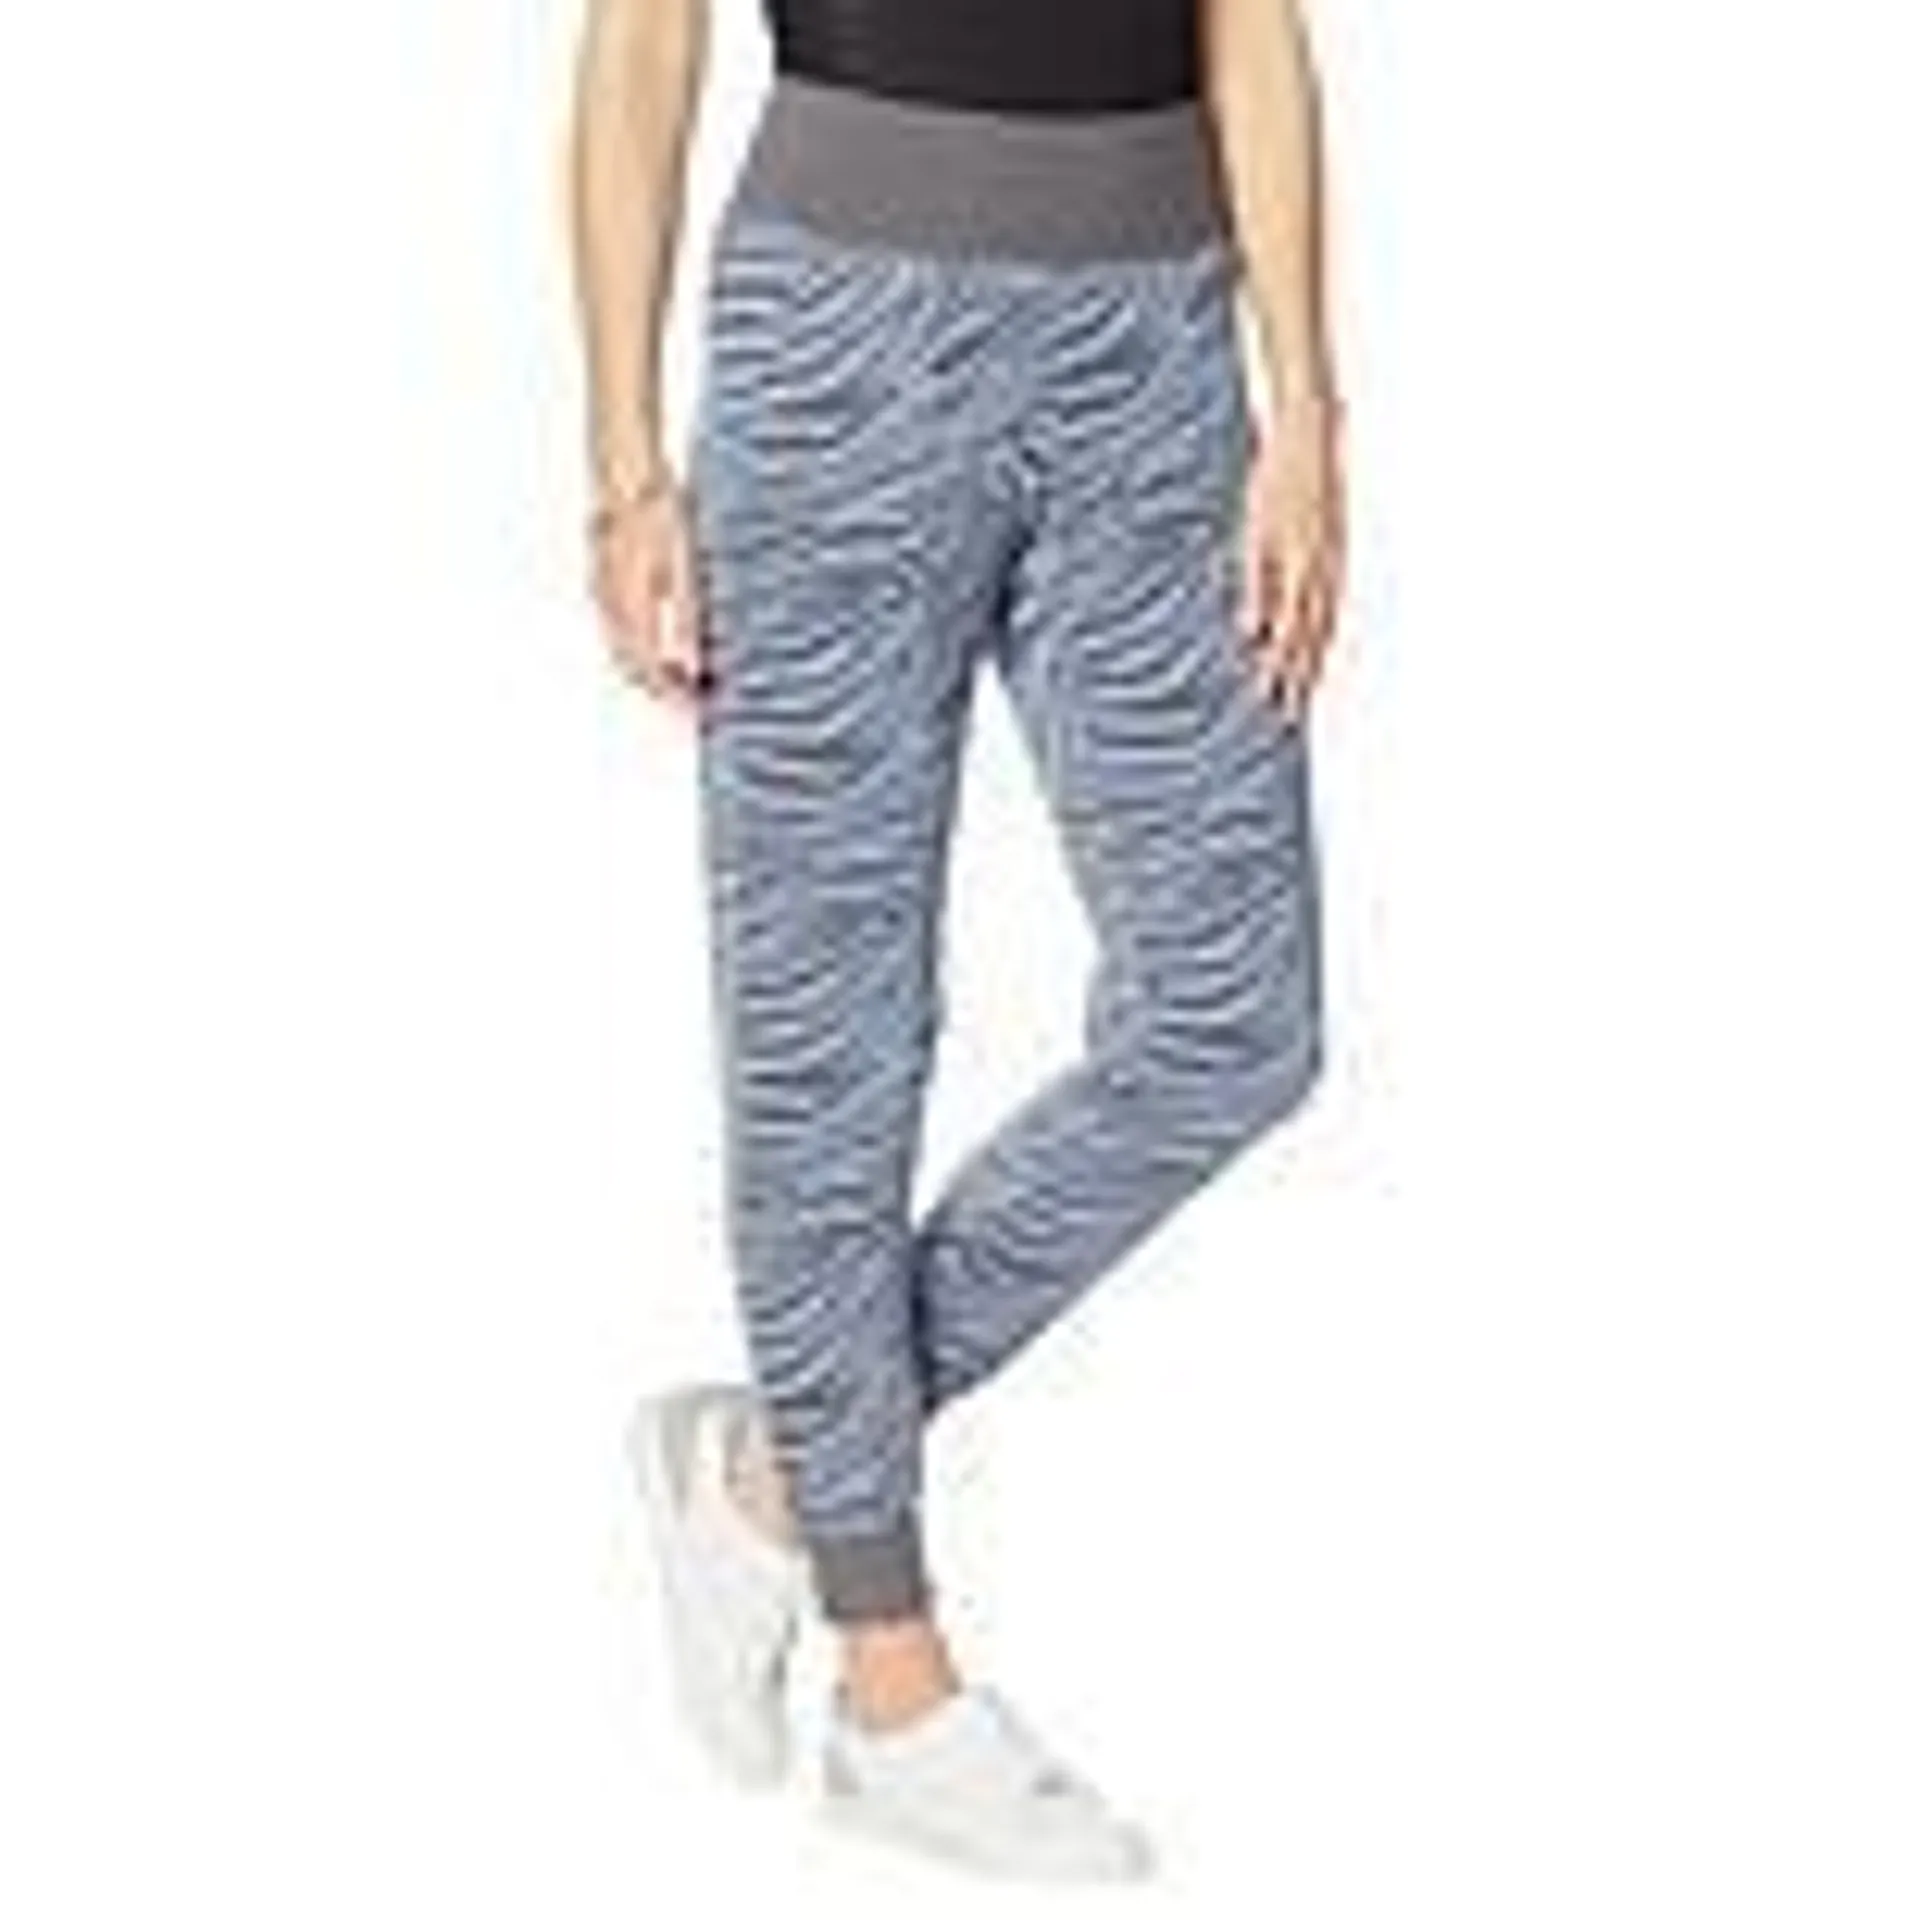 DG2 by Diane Gilman "DG Downtime" Summerweight Slim Jogger Pant